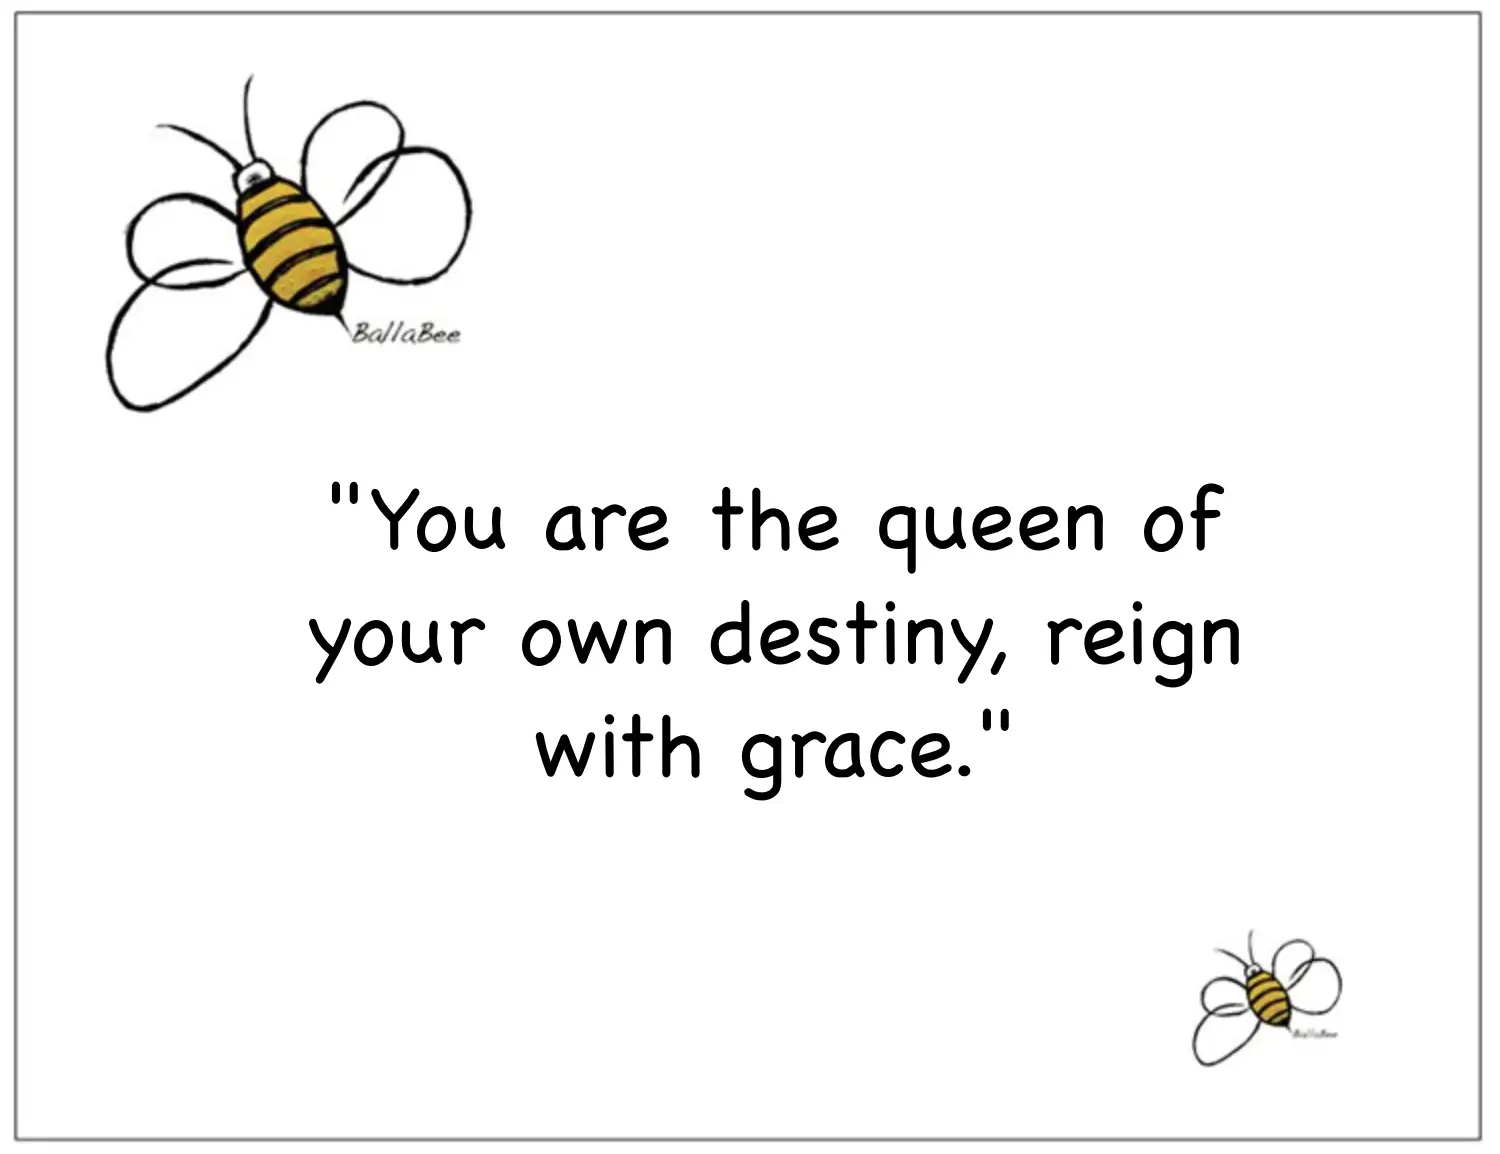 You are the queen of your own destiny, reign with grace